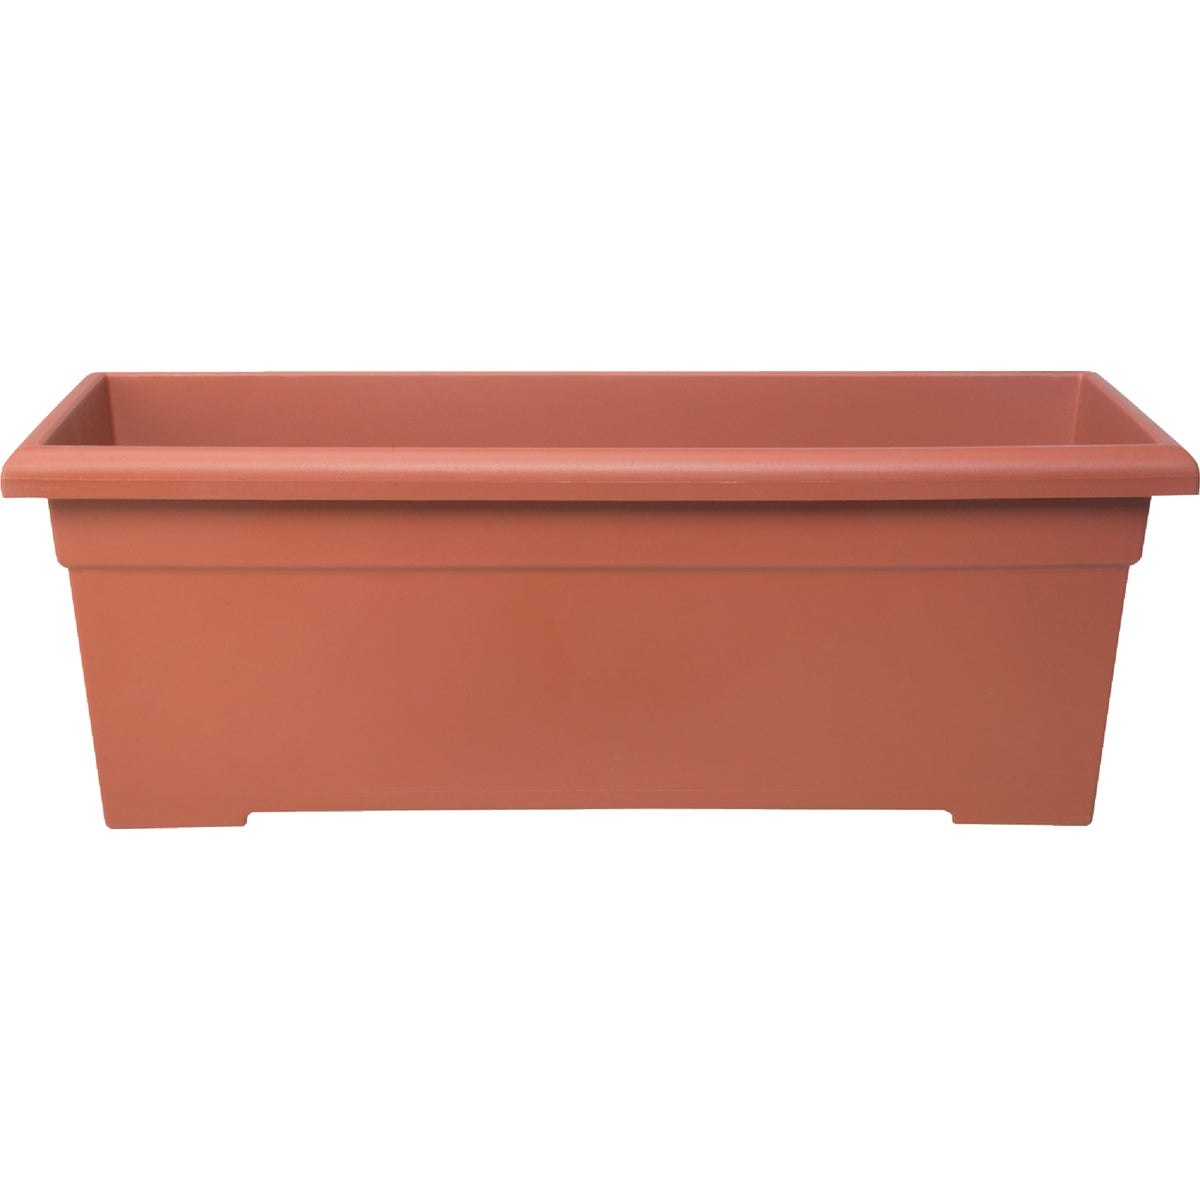 Item 723215, The classic design of the Romana planter offers a generous size, clean 